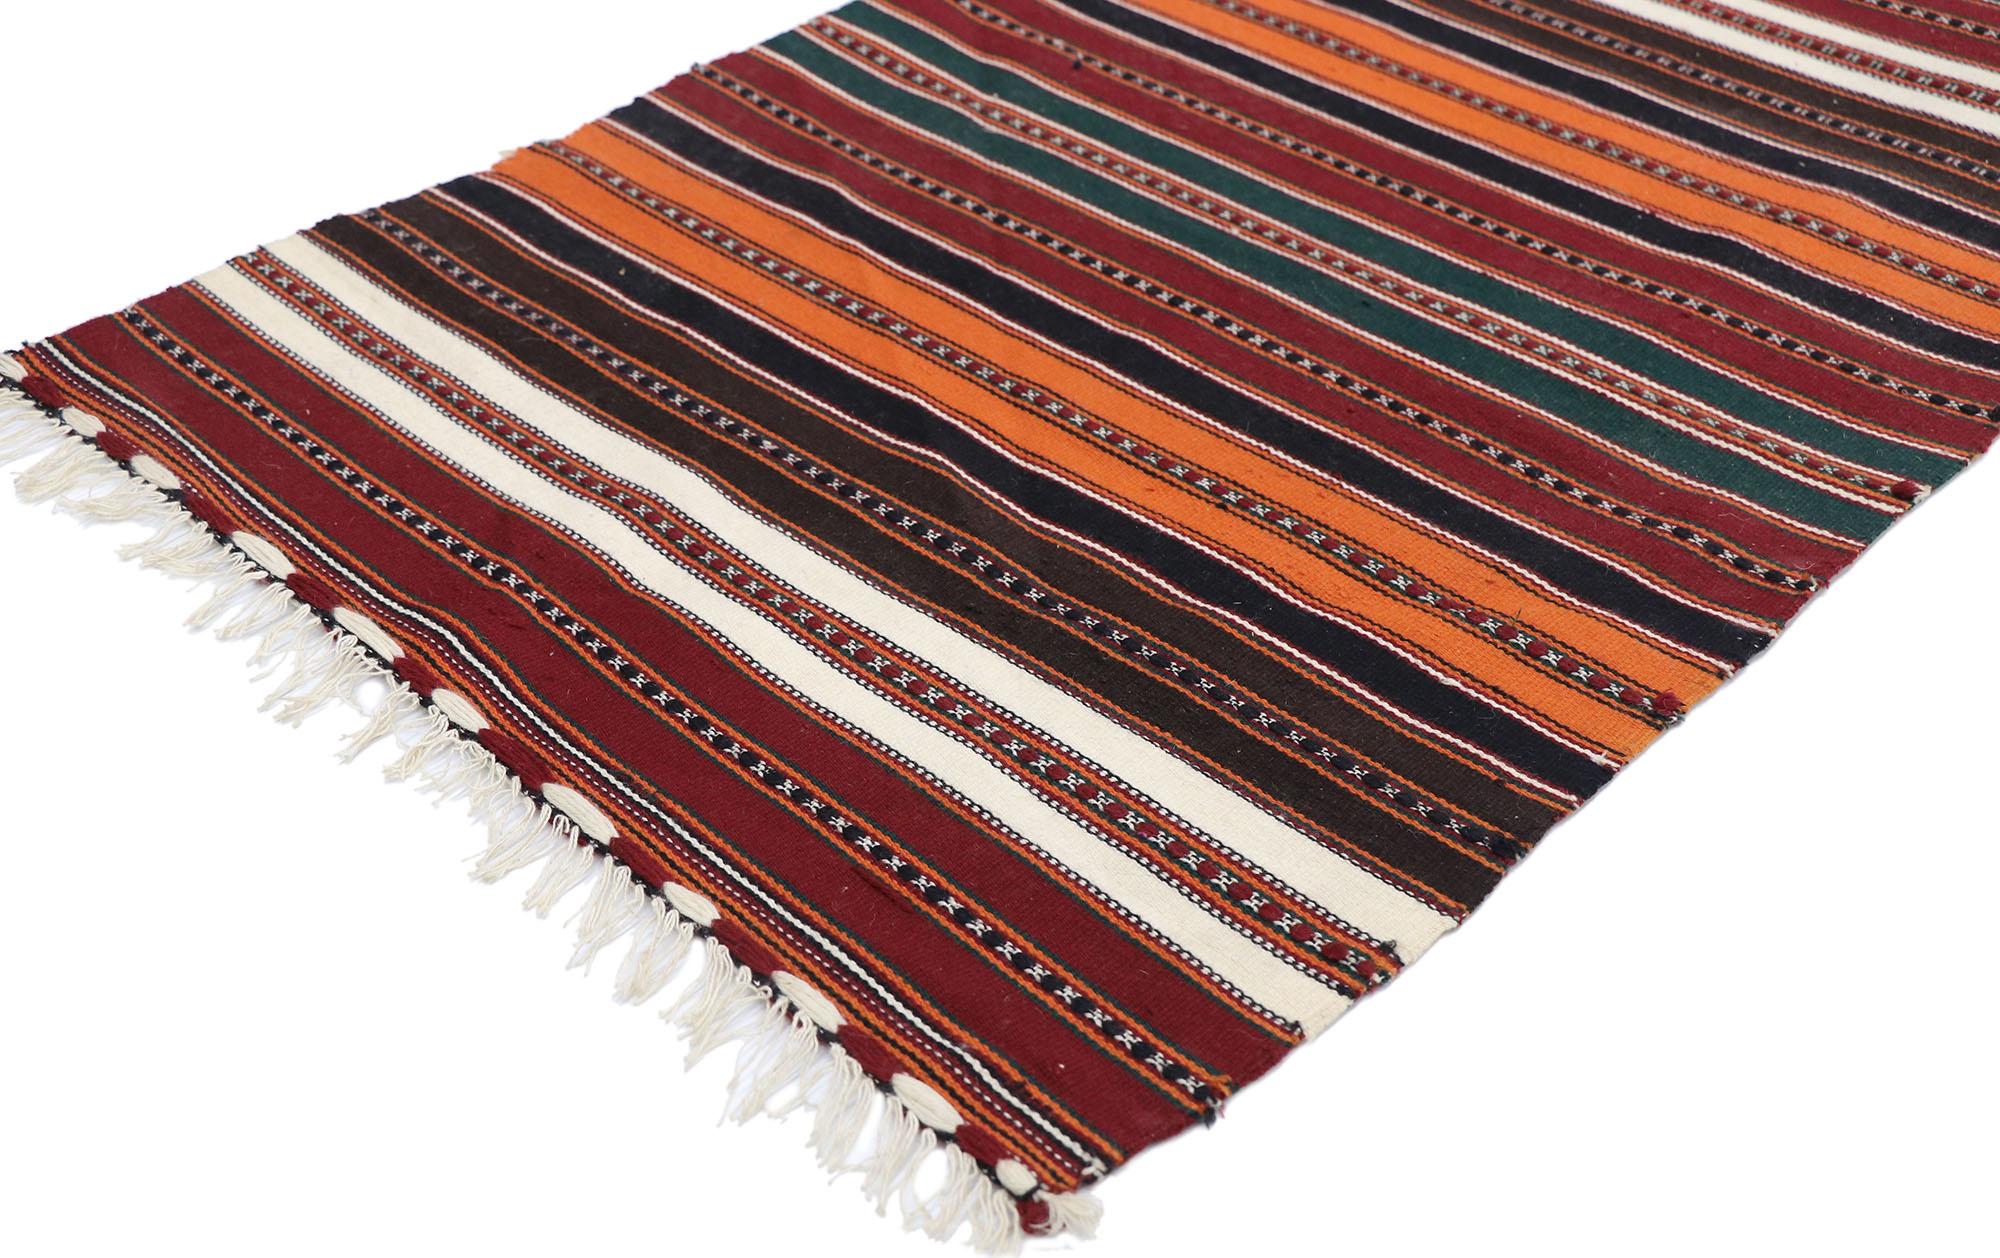 77900 Vintage Persian Shiraz Striped Kilim rug 02'02 x 03'03. With its warm hues and rugged beauty, this hand-woven wool vintage Persian Shiraz striped kilim rug manages to meld contemporary, modern, and traditional design elements. The flat-weave